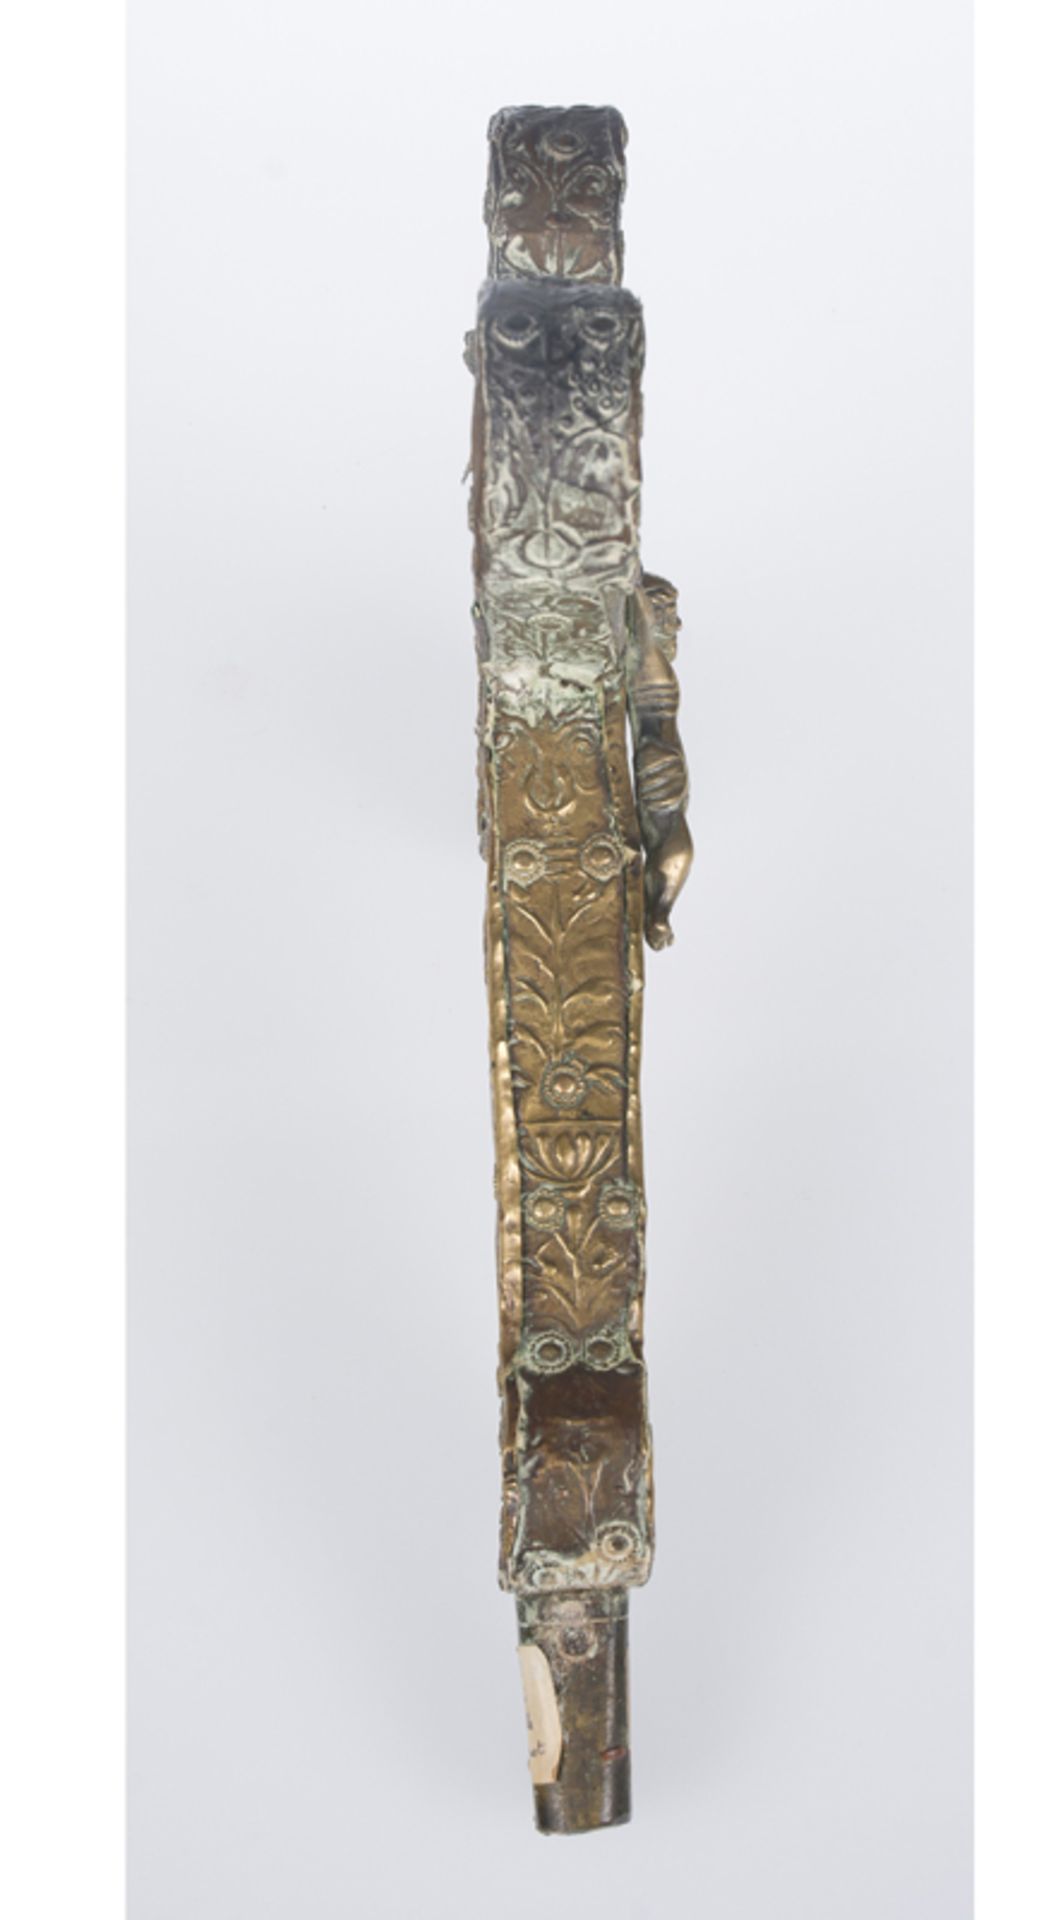 Embossed and hammered gilded copper processional cross, with an appliqué figure of Christ. La - Image 8 of 9